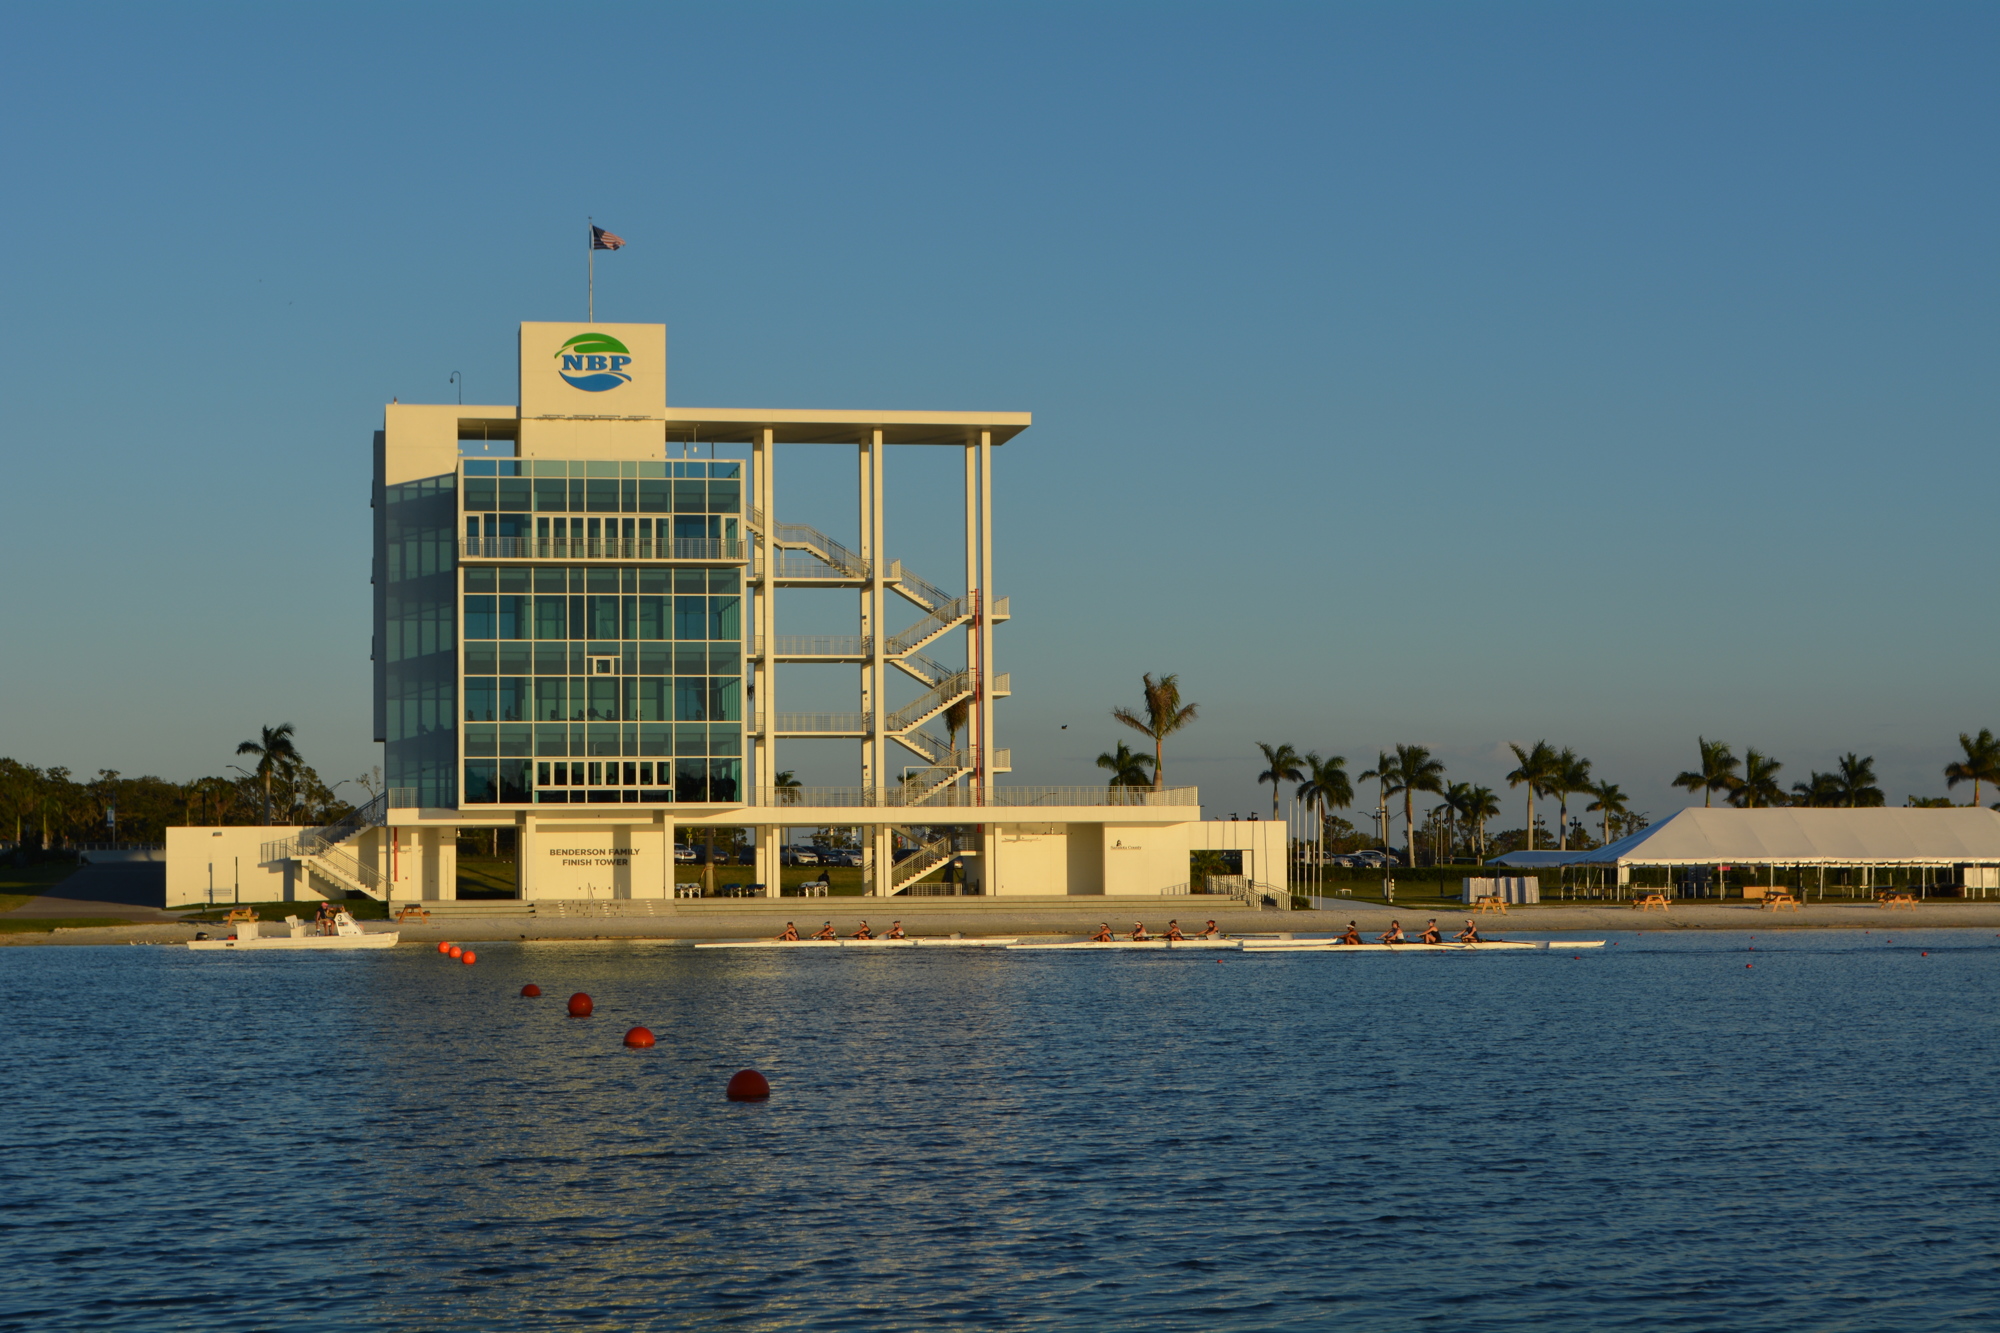 Construction of this finish tower at Nathan Benderson Park cost more than $6 million and had to be finished prior to the 2017 World Rowing Championships in the fall. File photo.